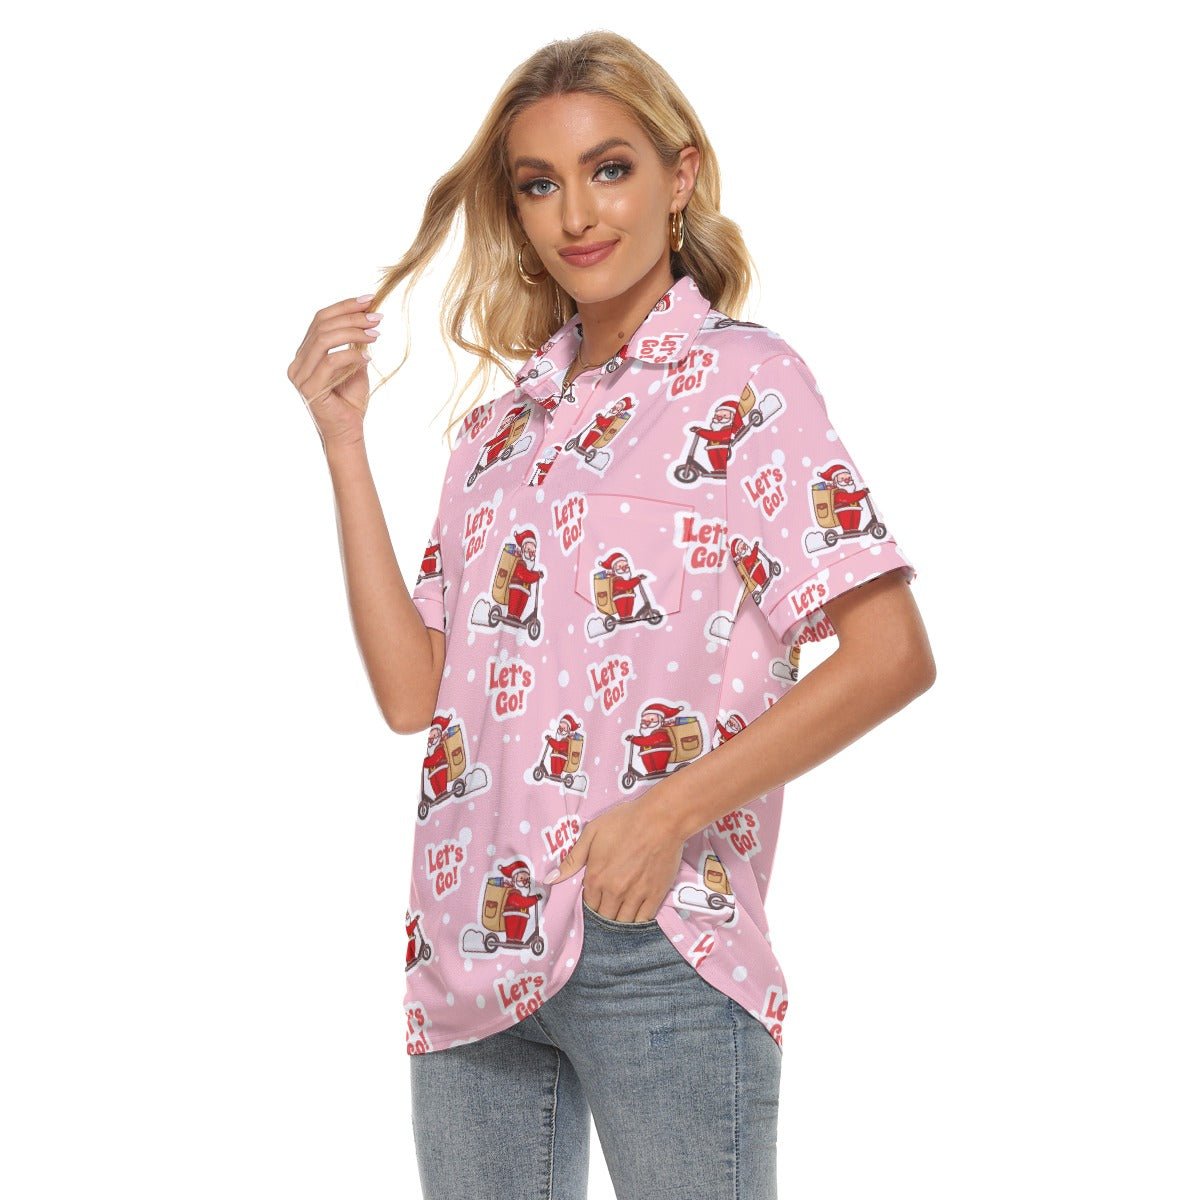 Women's Christmas Polo T-Shirt - Pink "Let's Go" - Festive Style